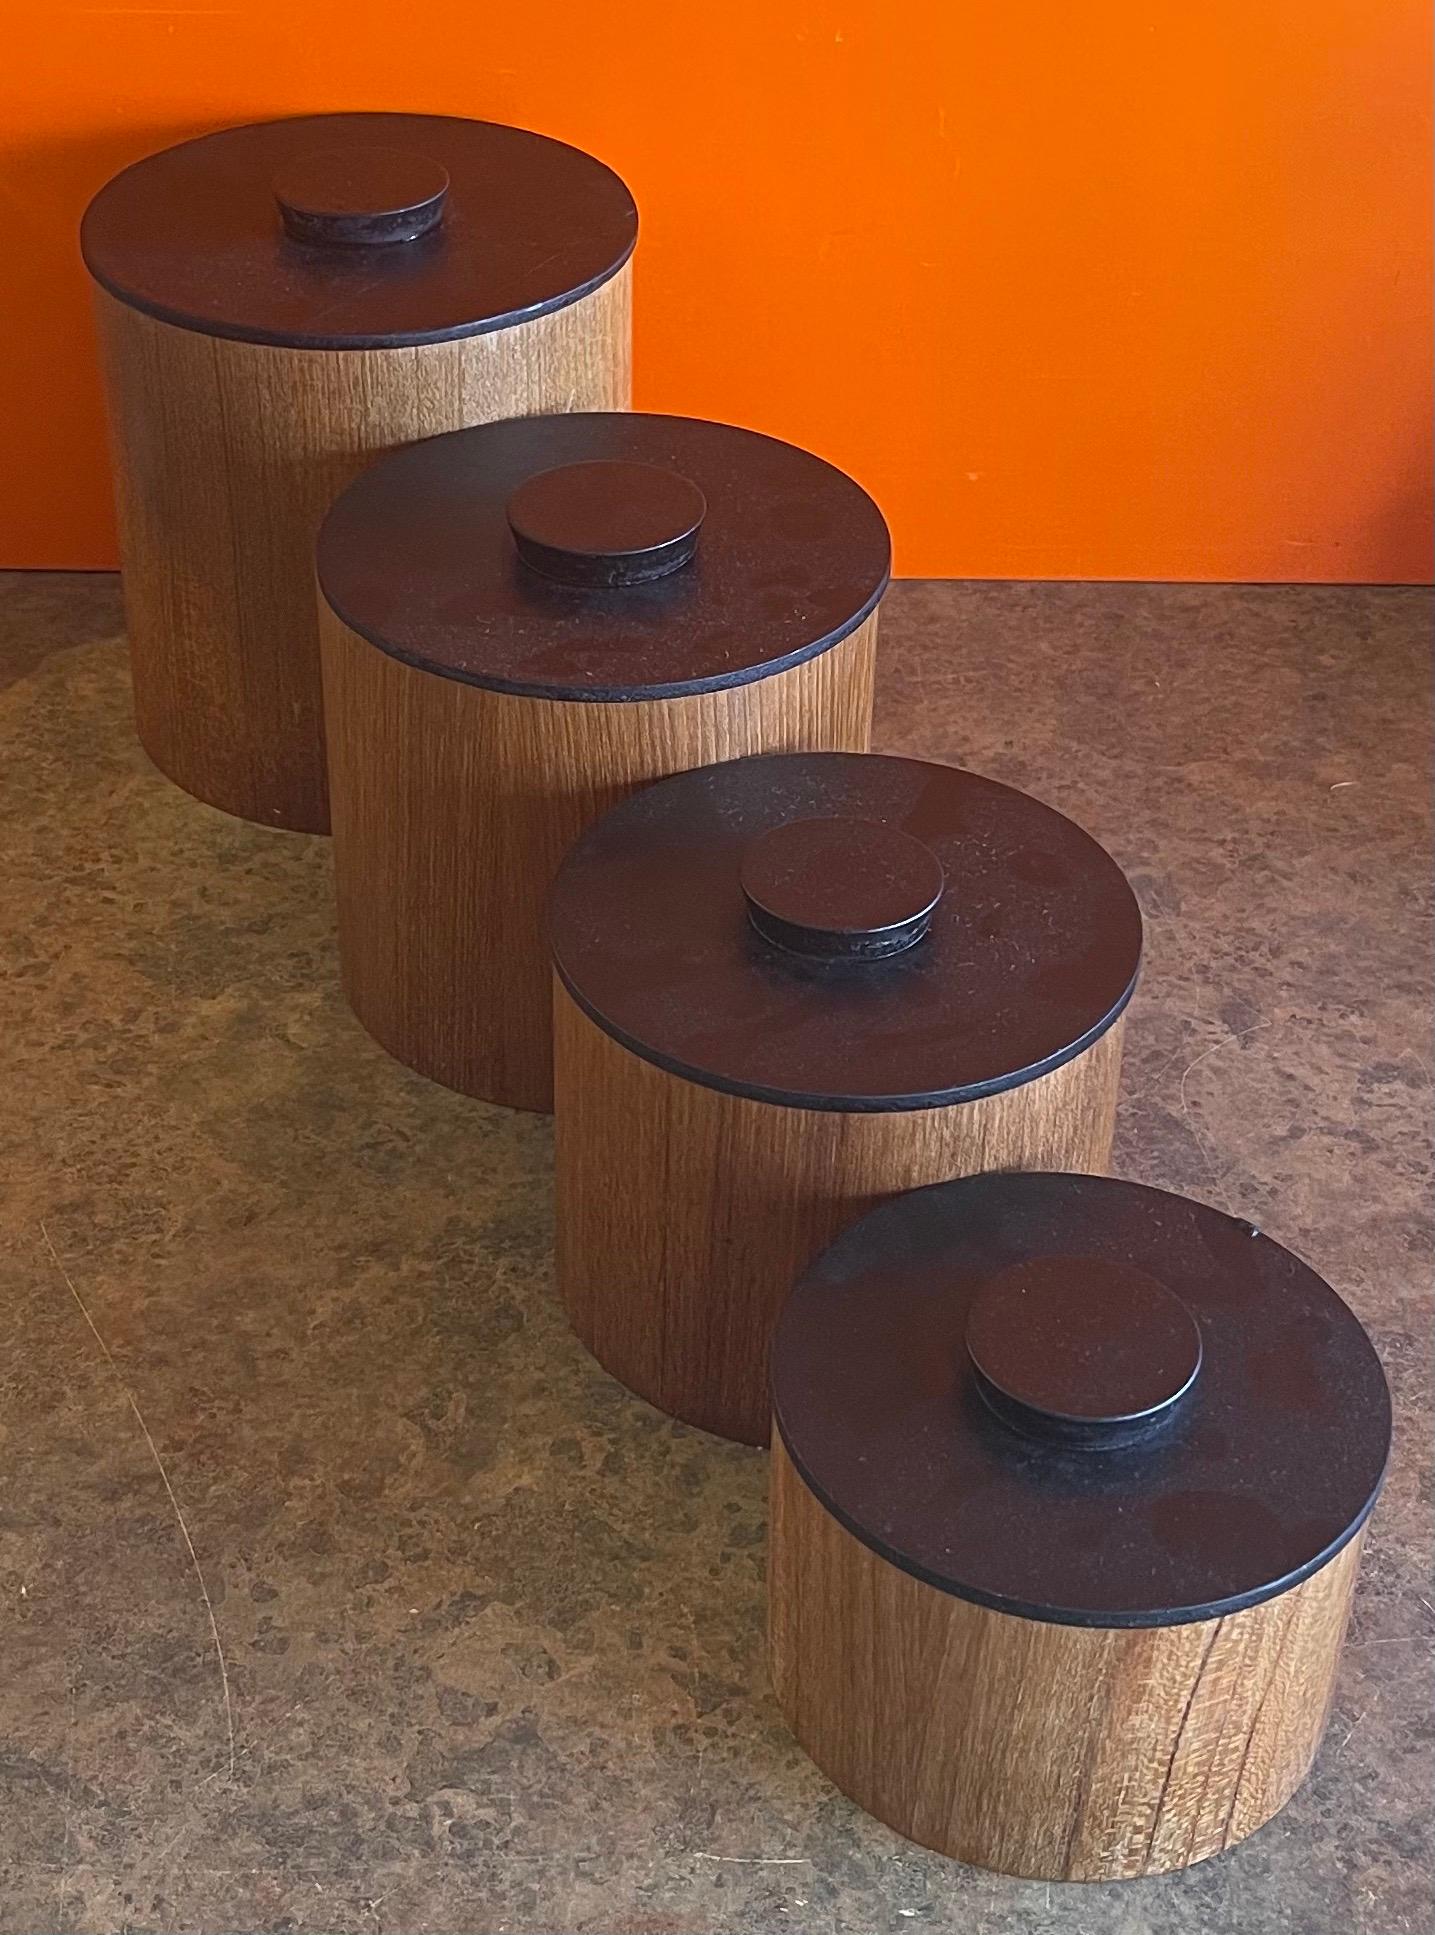 Set of four Danish modern teak stackable storage cannisters, circa 1960s. The cannisters have black painted lids, are in good vintage condition and measure 7